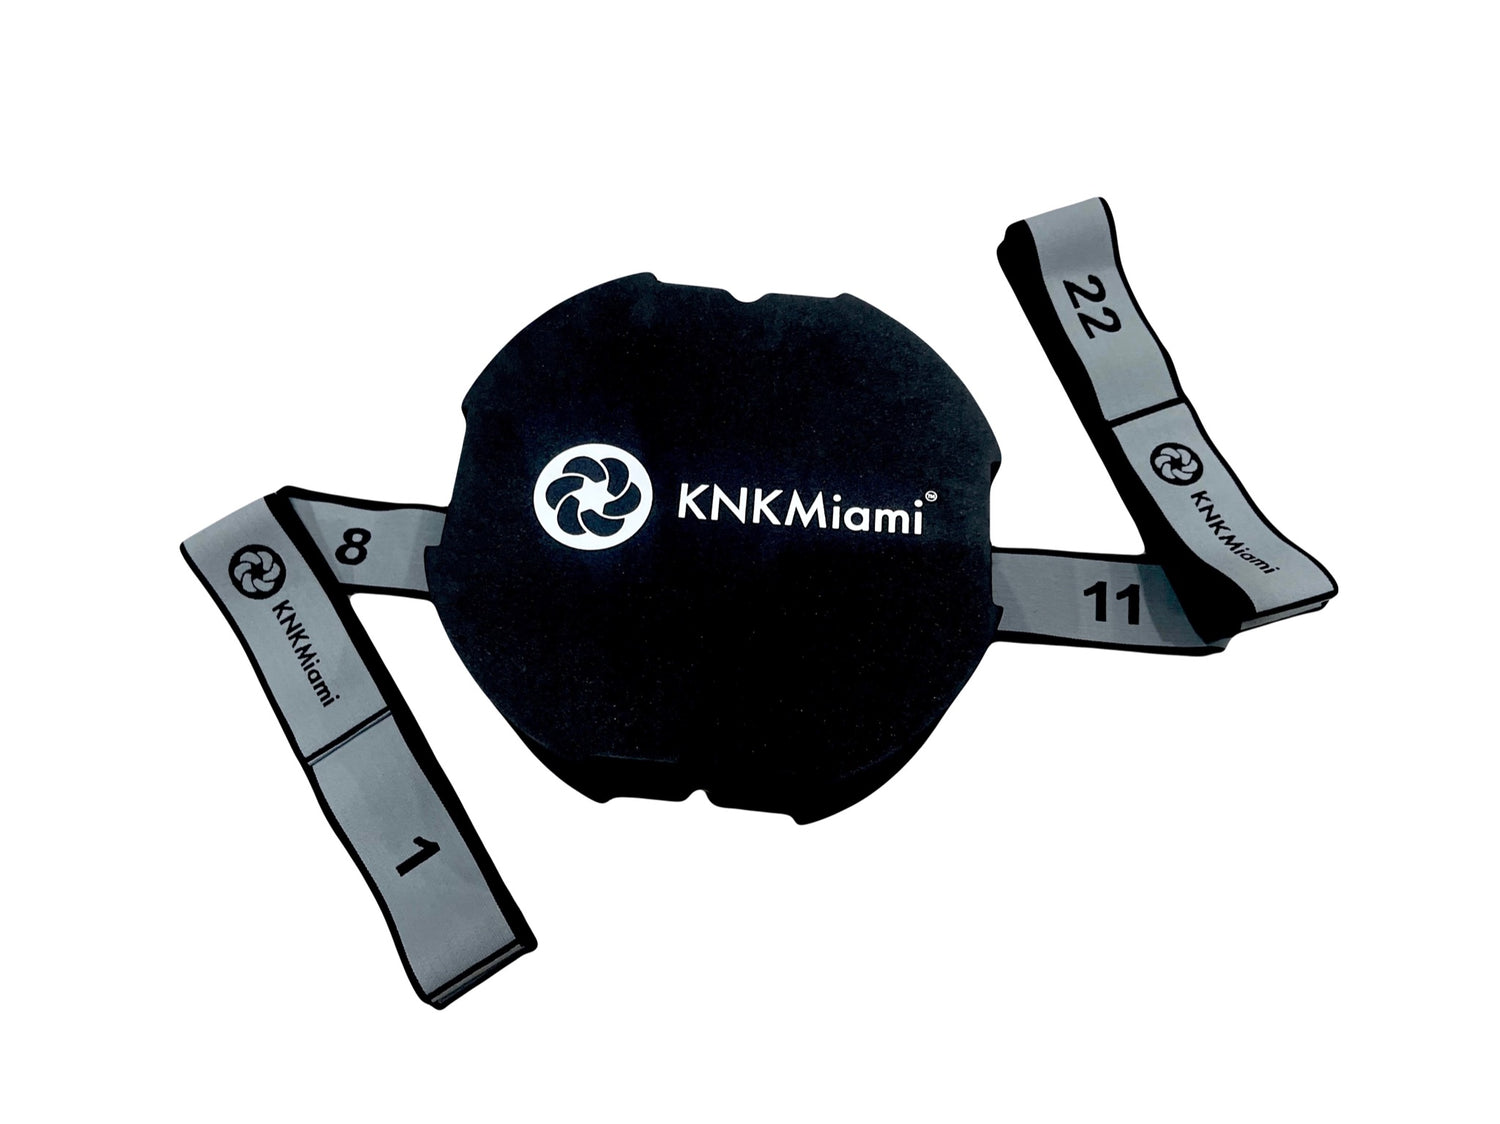 KNKMiami Stretch Band Premium 24 Loops - Light Resistance